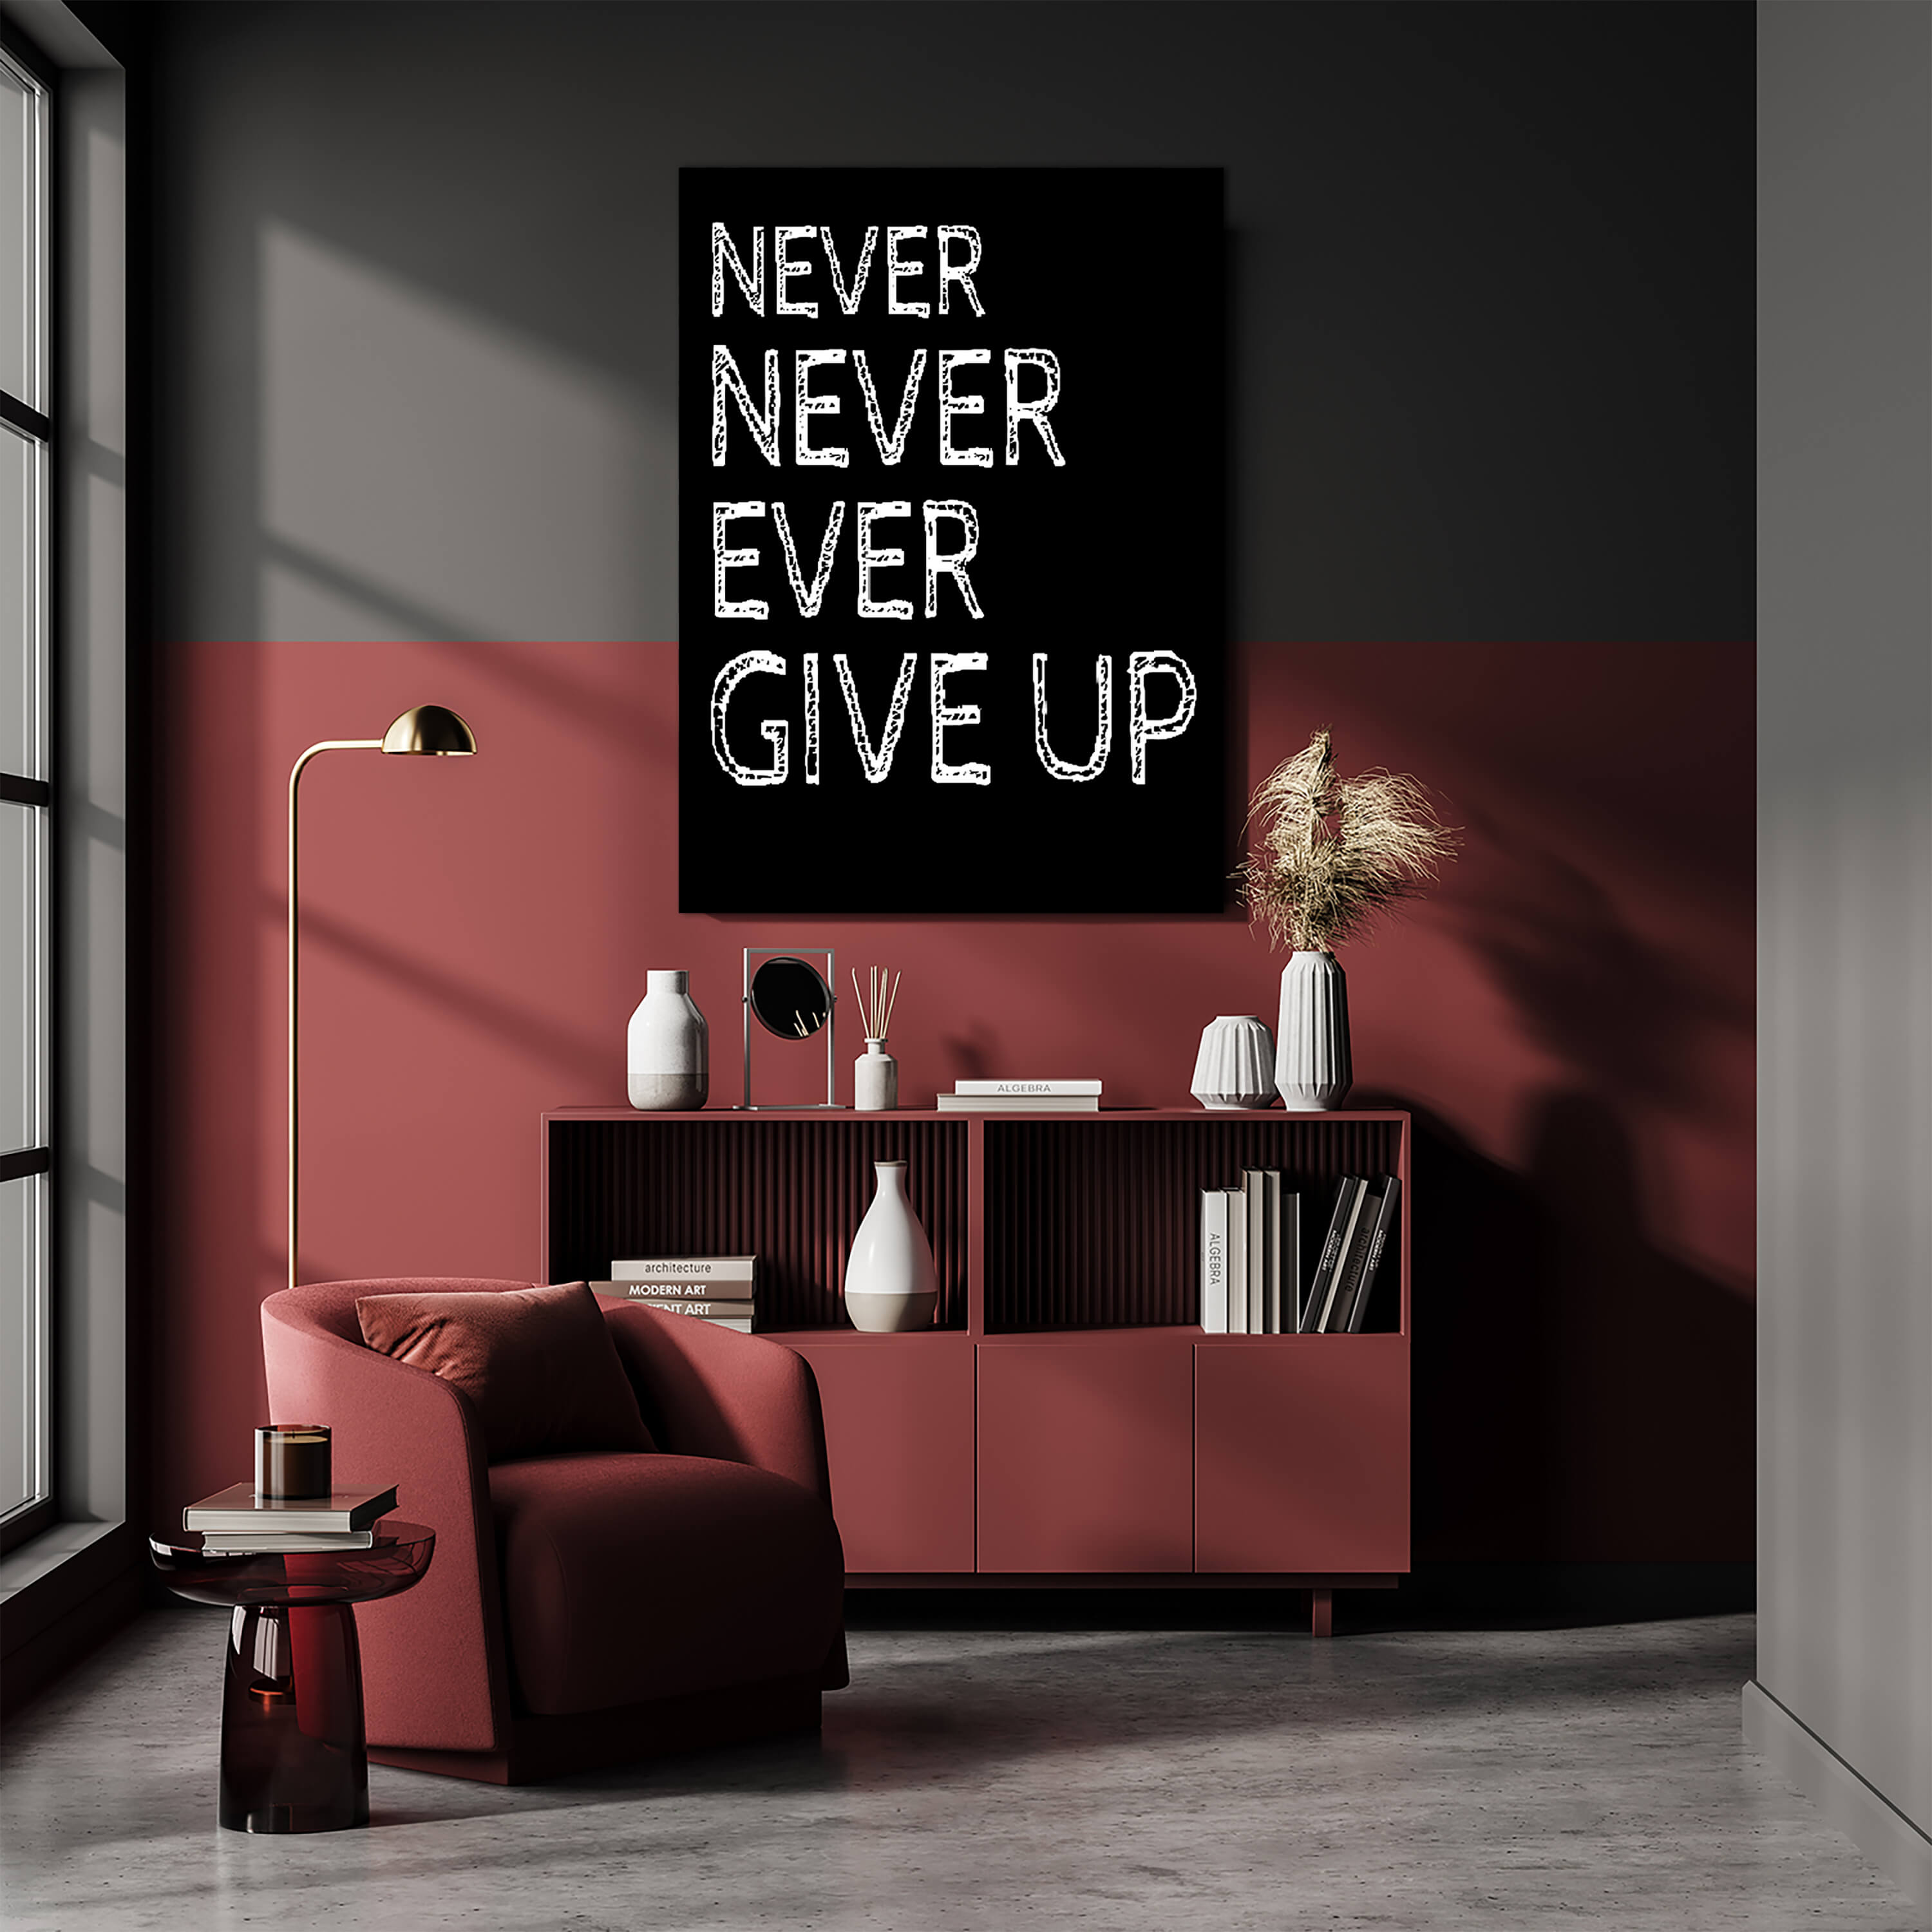 WW3_0028_never never never give up B AOA11116